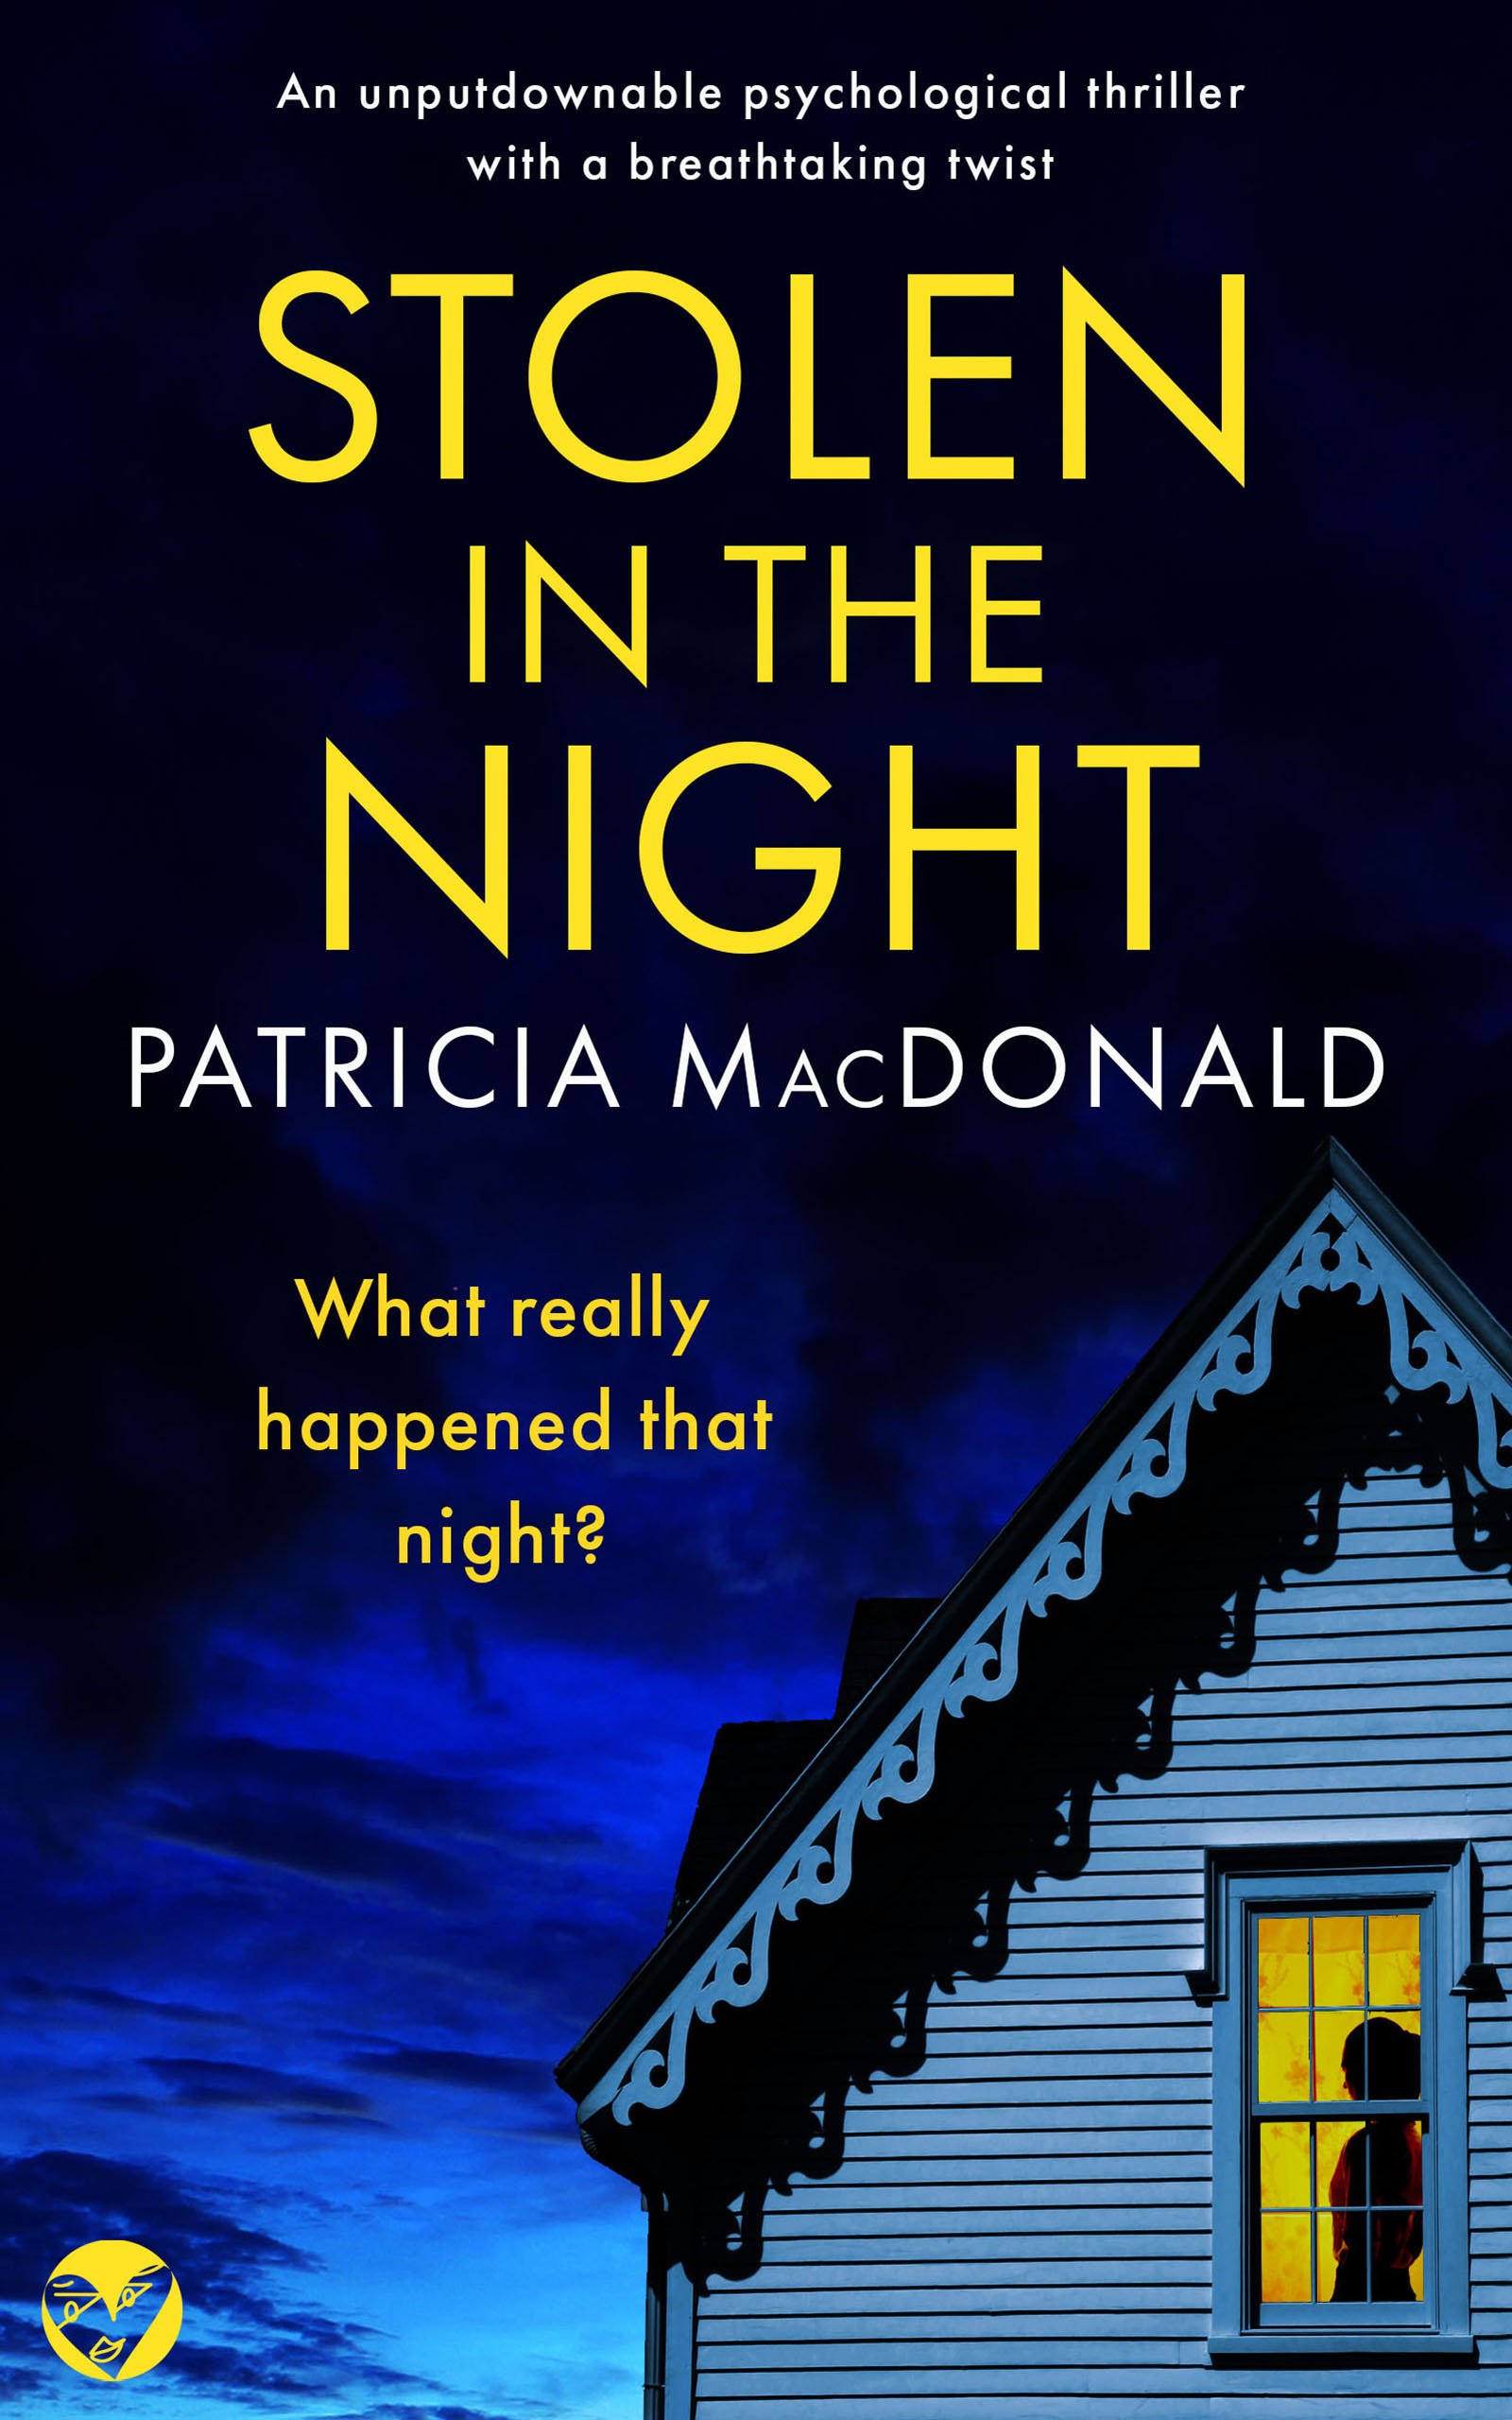 STOLEN IN THE NIGHT Cover publish.jpg